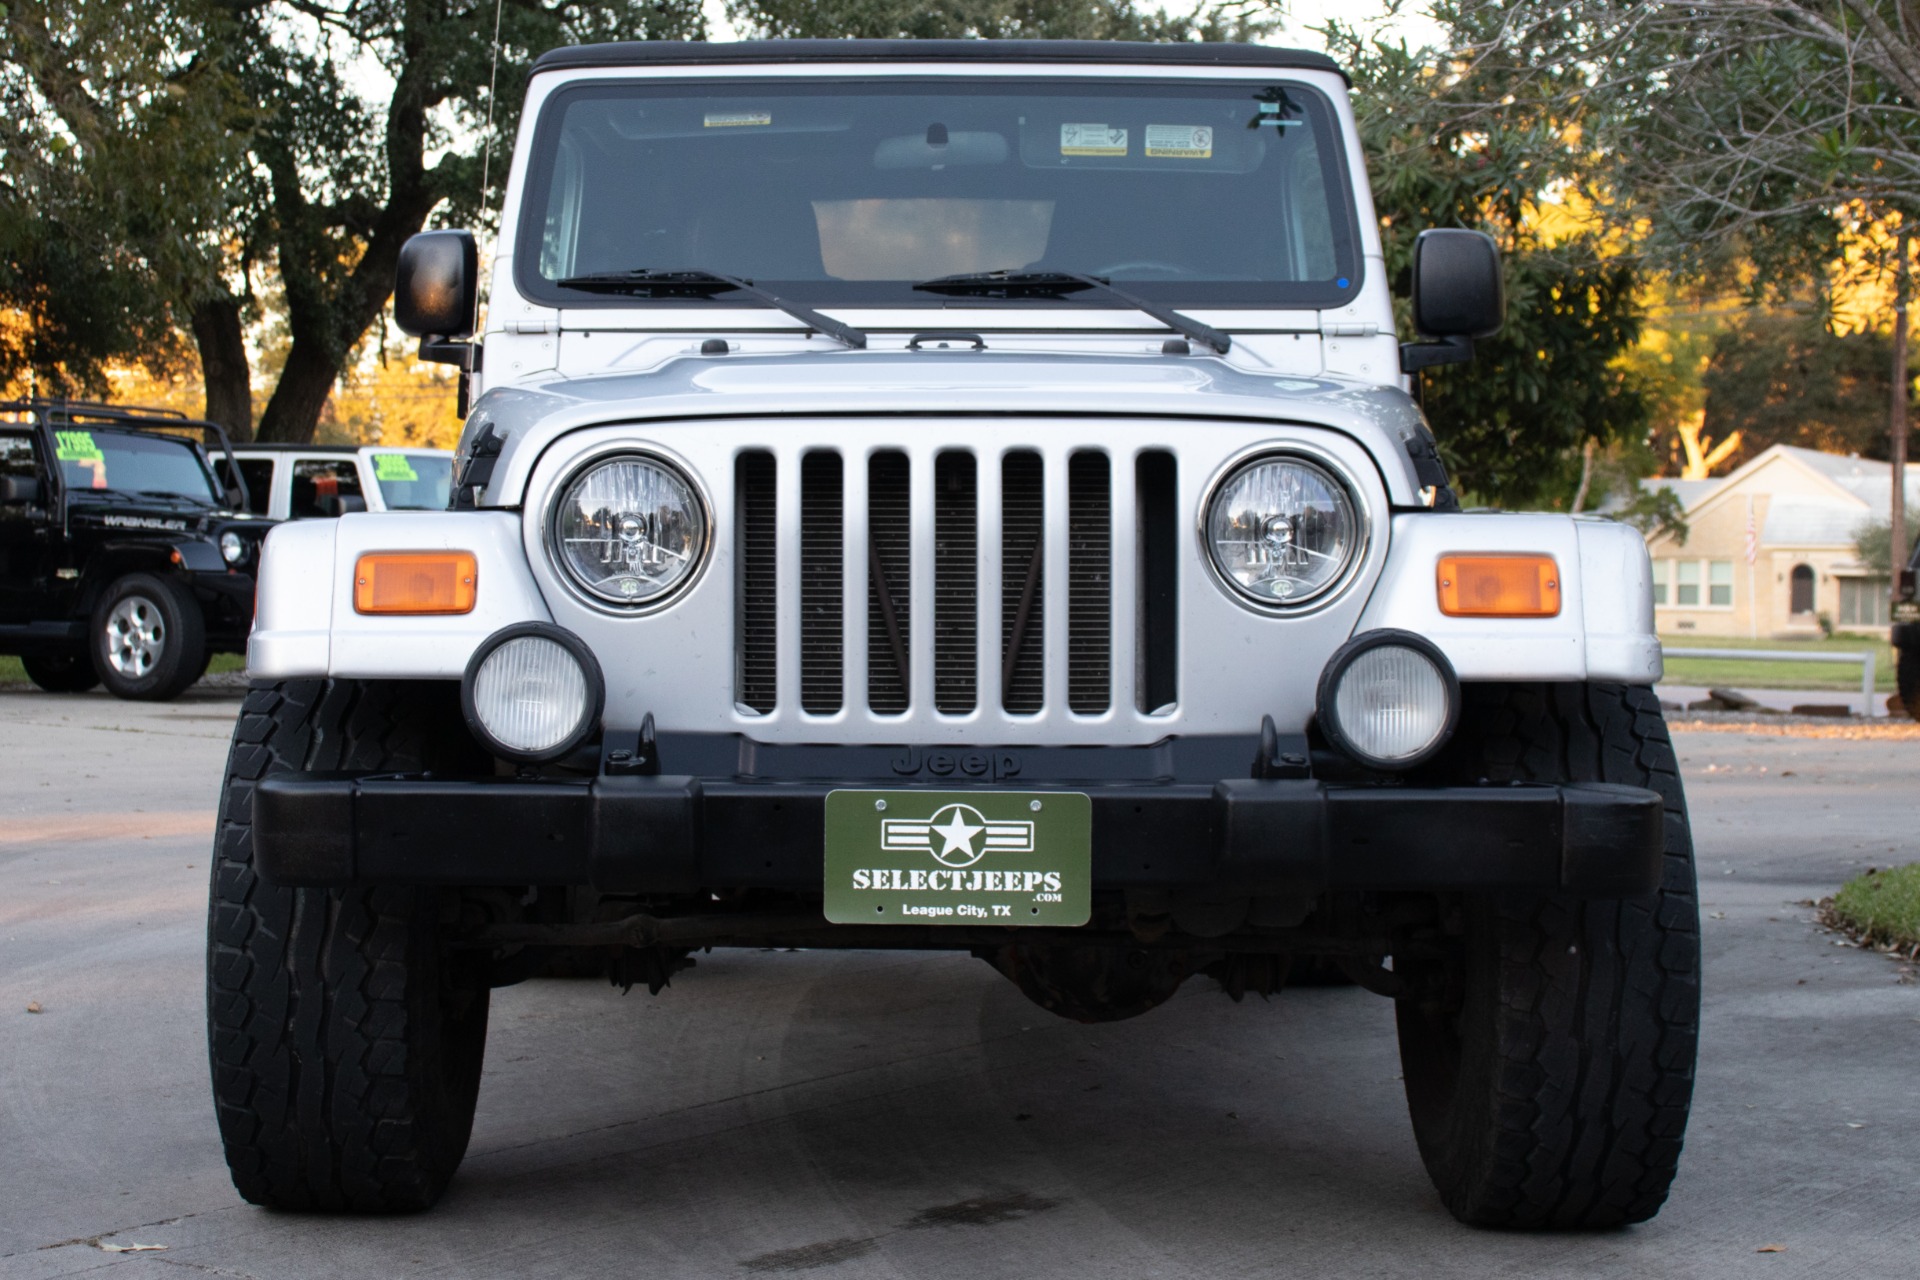 Used 2003 Jeep Wrangler Freedom Edition For Sale ($11,995) | Select Jeeps  Inc. Stock #363800